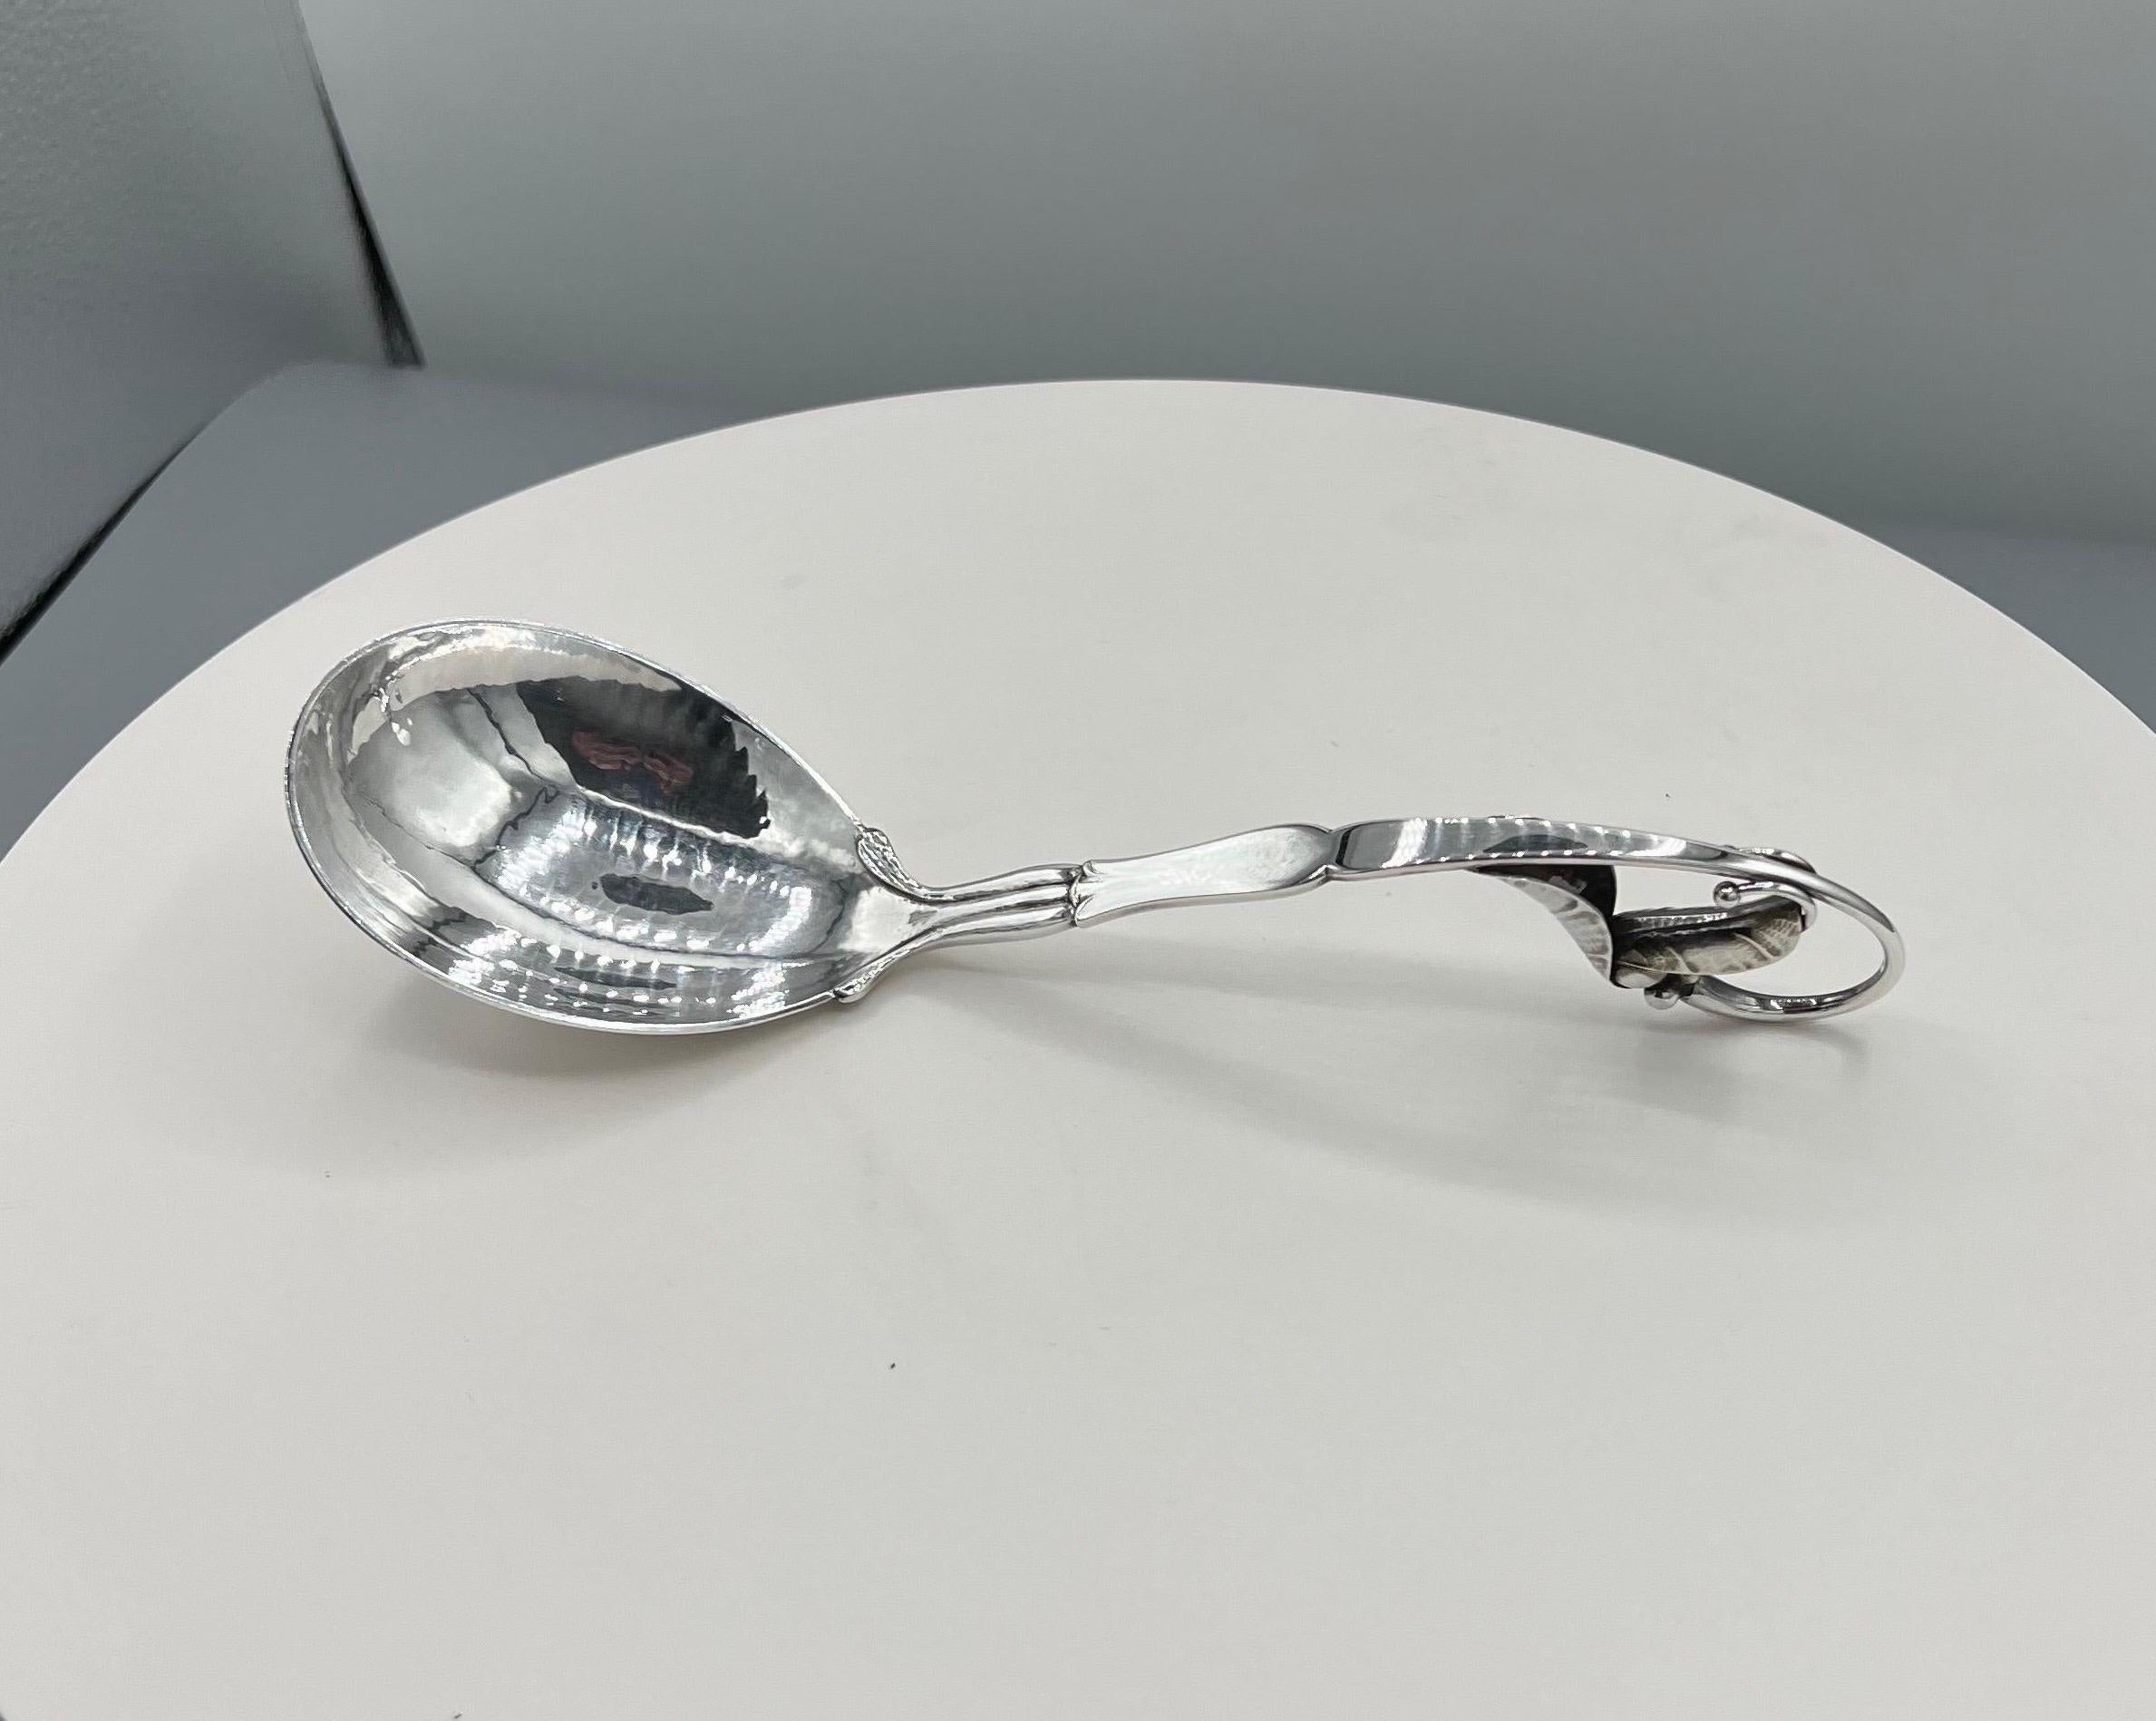 Georg Jensen Sterling Silver Serving Spoon 
For over a century, Georg Jensen has produced some of the finest objects in Scandinavian modern design, including silver tableware, serving pieces, home decor, jewelry and more, frequently partnering with